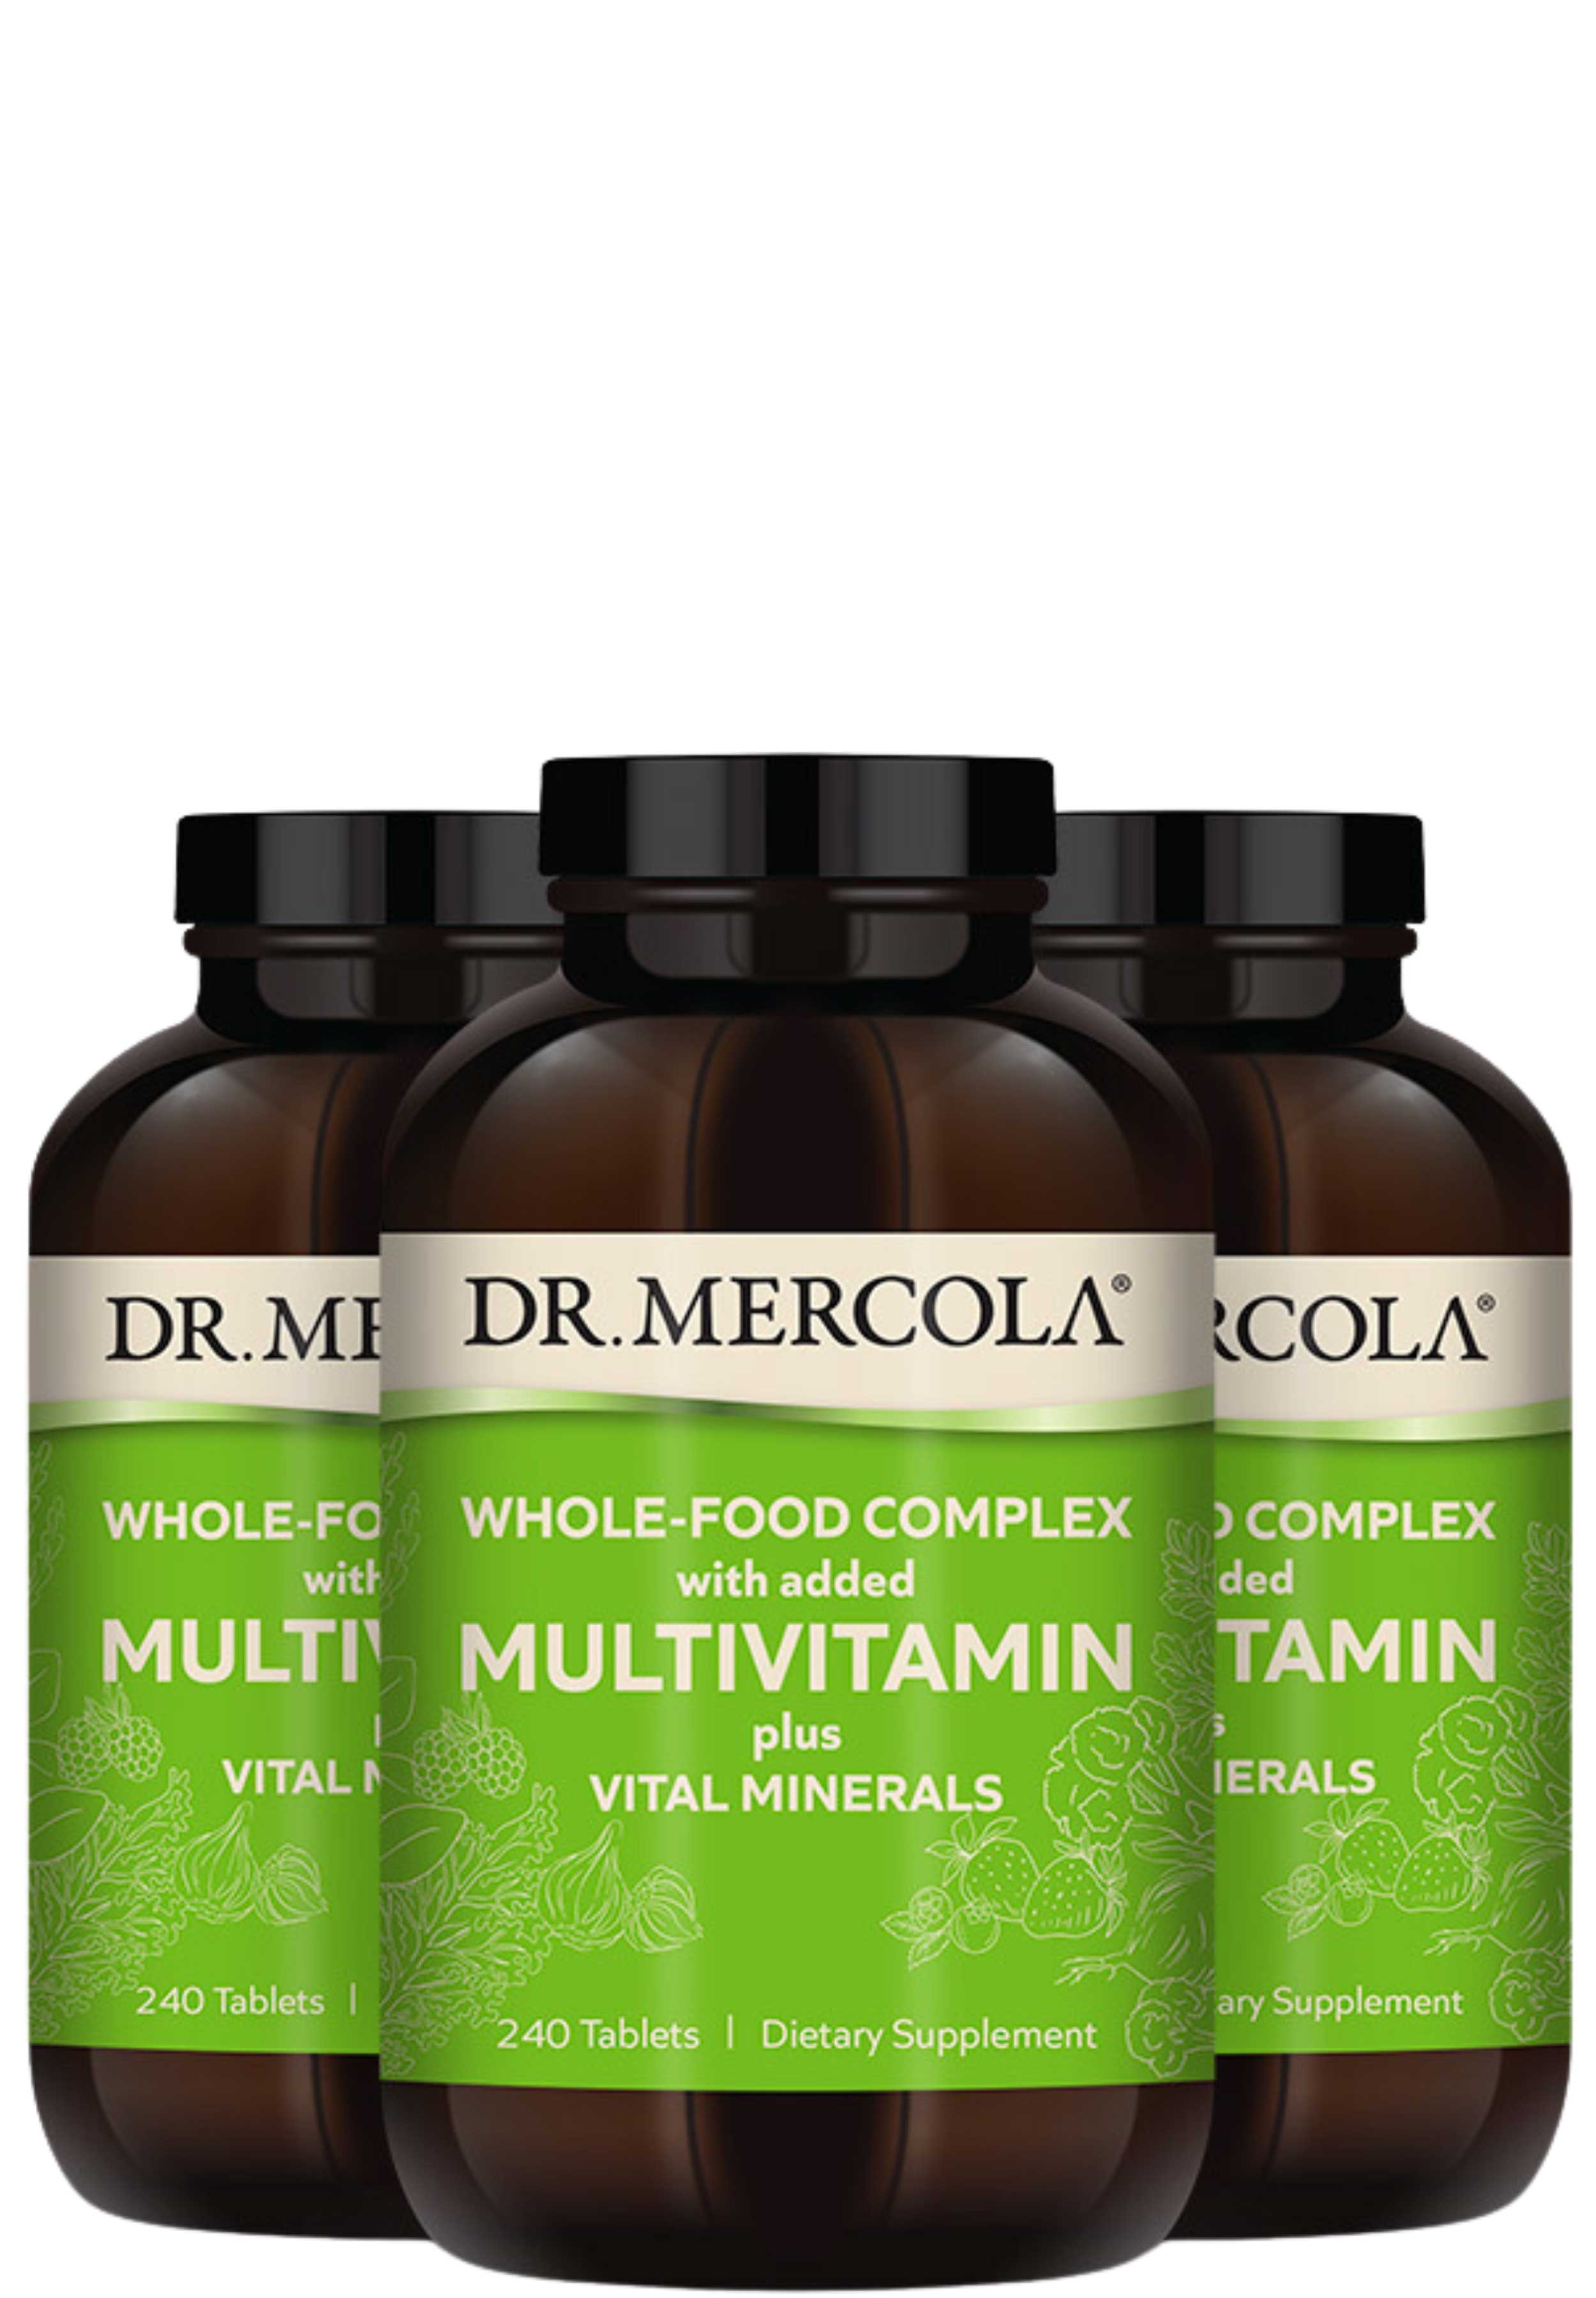 Dr. Mercola Whole Food Complex (Formerly Whole Food Multivitamin Plus)